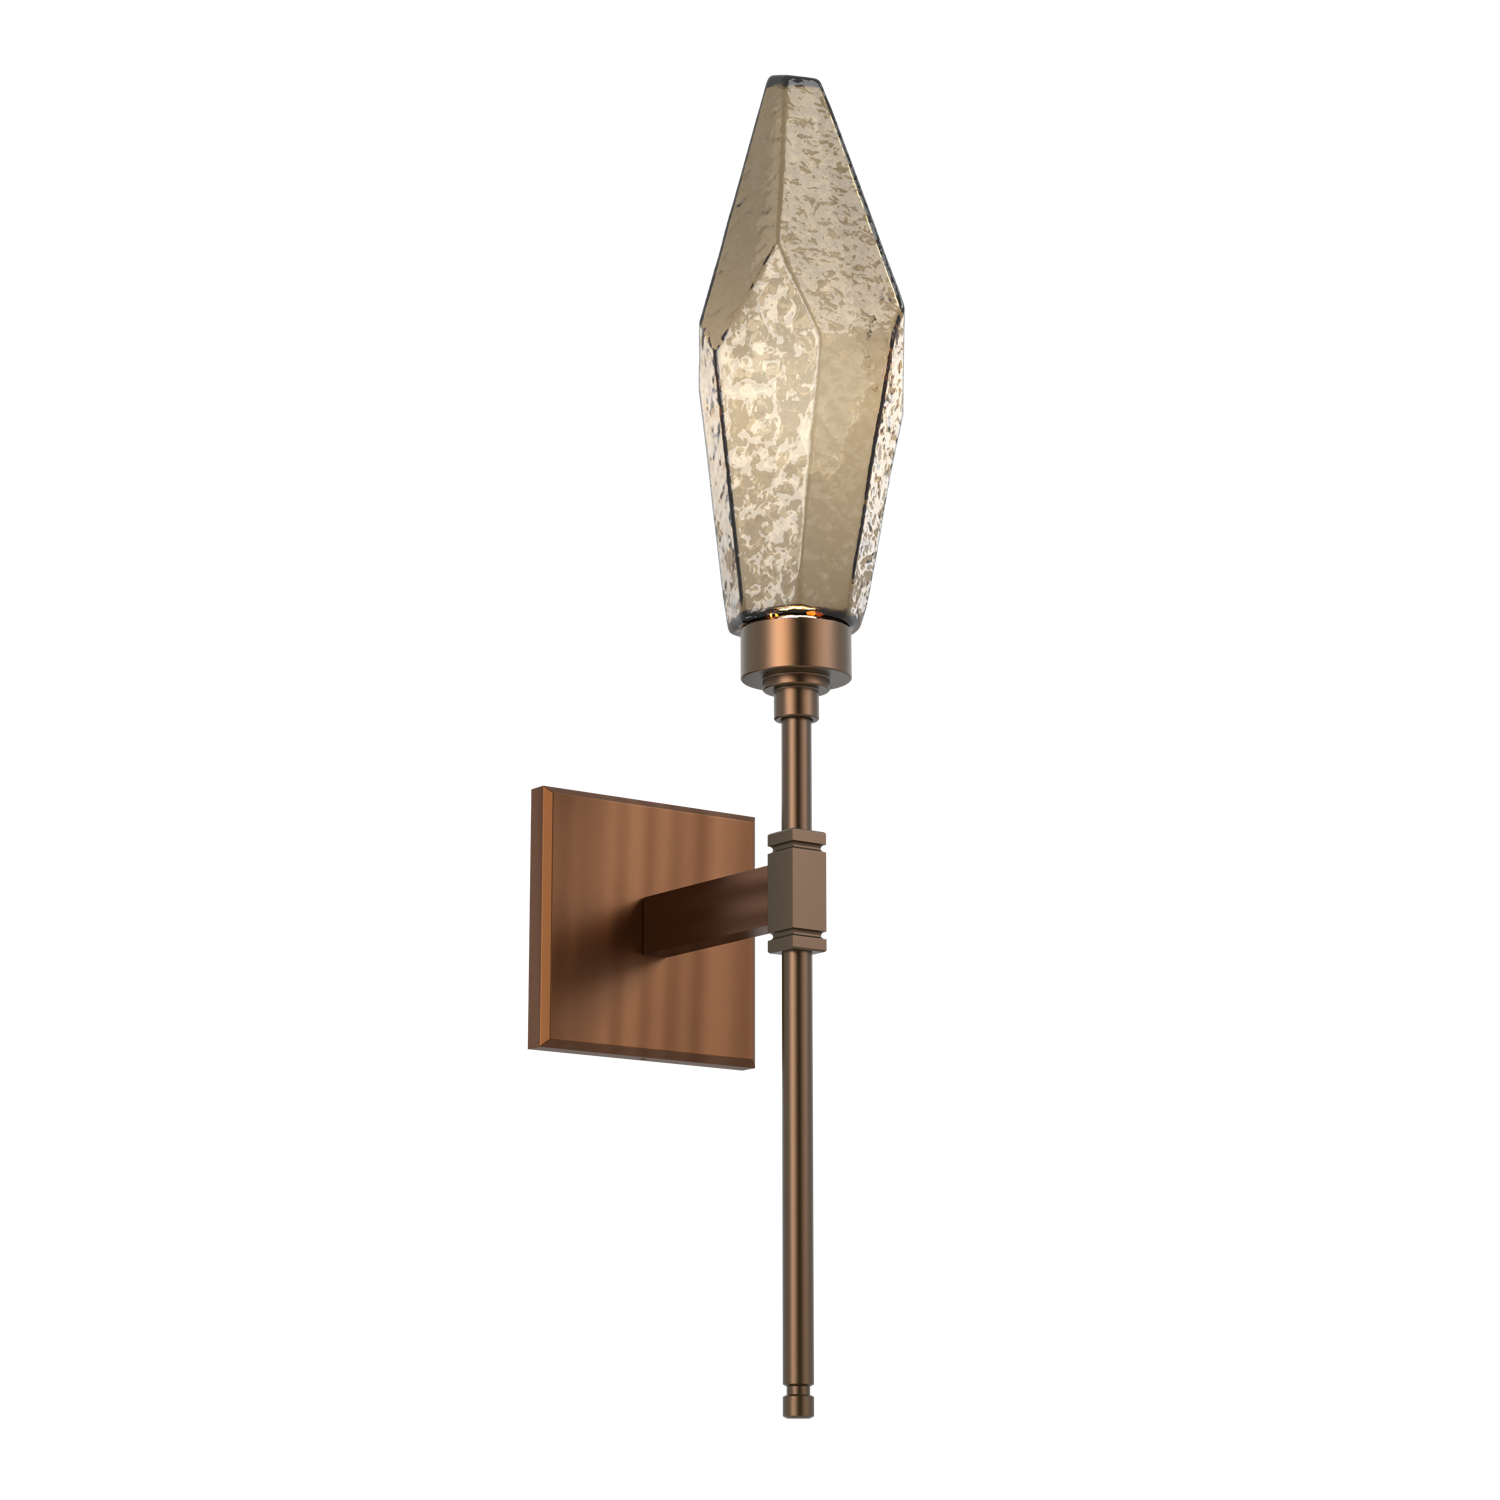 IDB0050-07-RB-CB-Hammerton-Studio-Rock-Crystal-belvedere-wall-sconce-with-oil-rubbed-bronze-finish-and-chilled-bronze-blown-glass-shades-and-LED-lamping